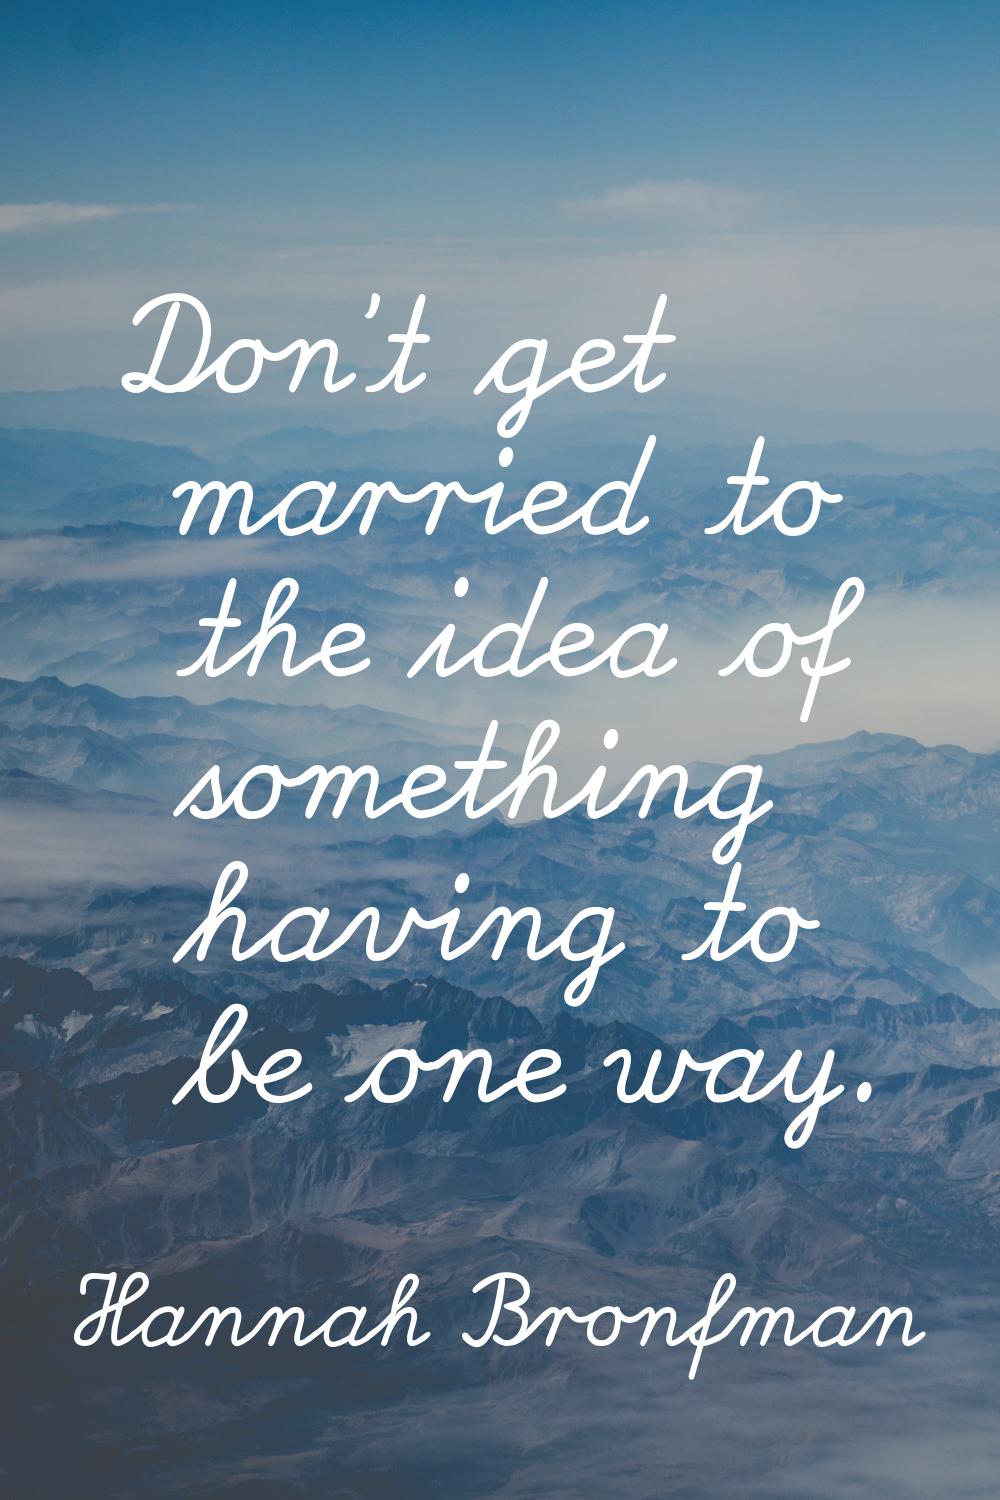 Don't get married to the idea of something having to be one way.